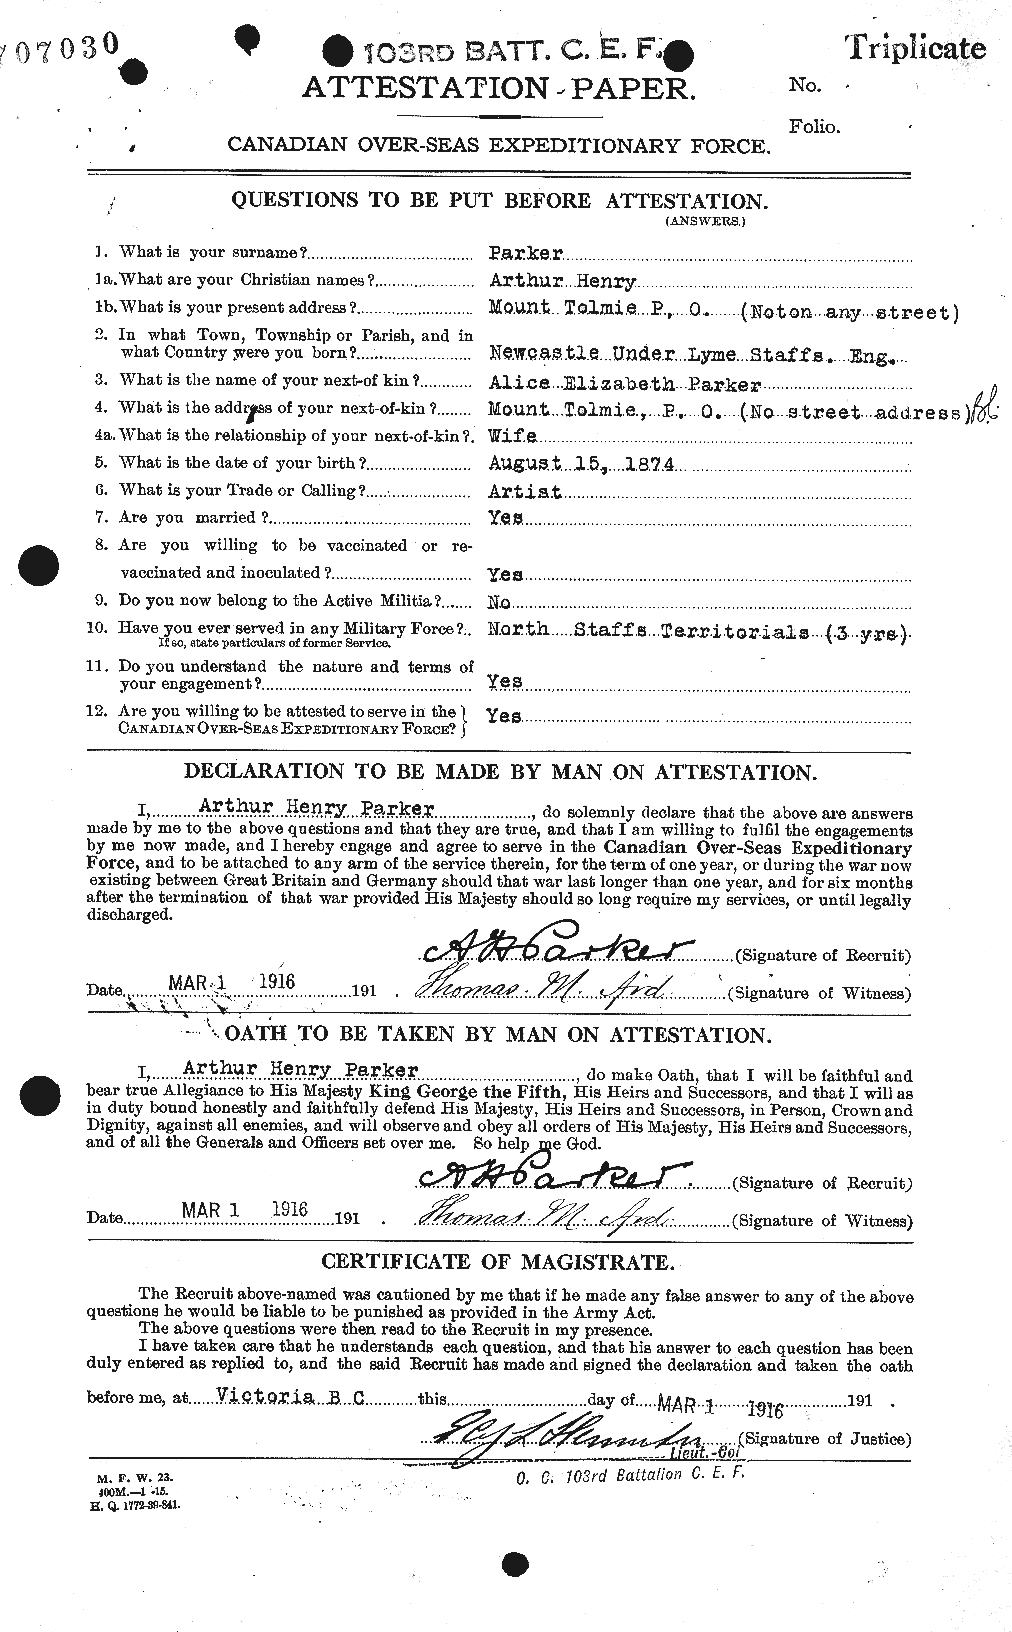 Personnel Records of the First World War - CEF 565027a